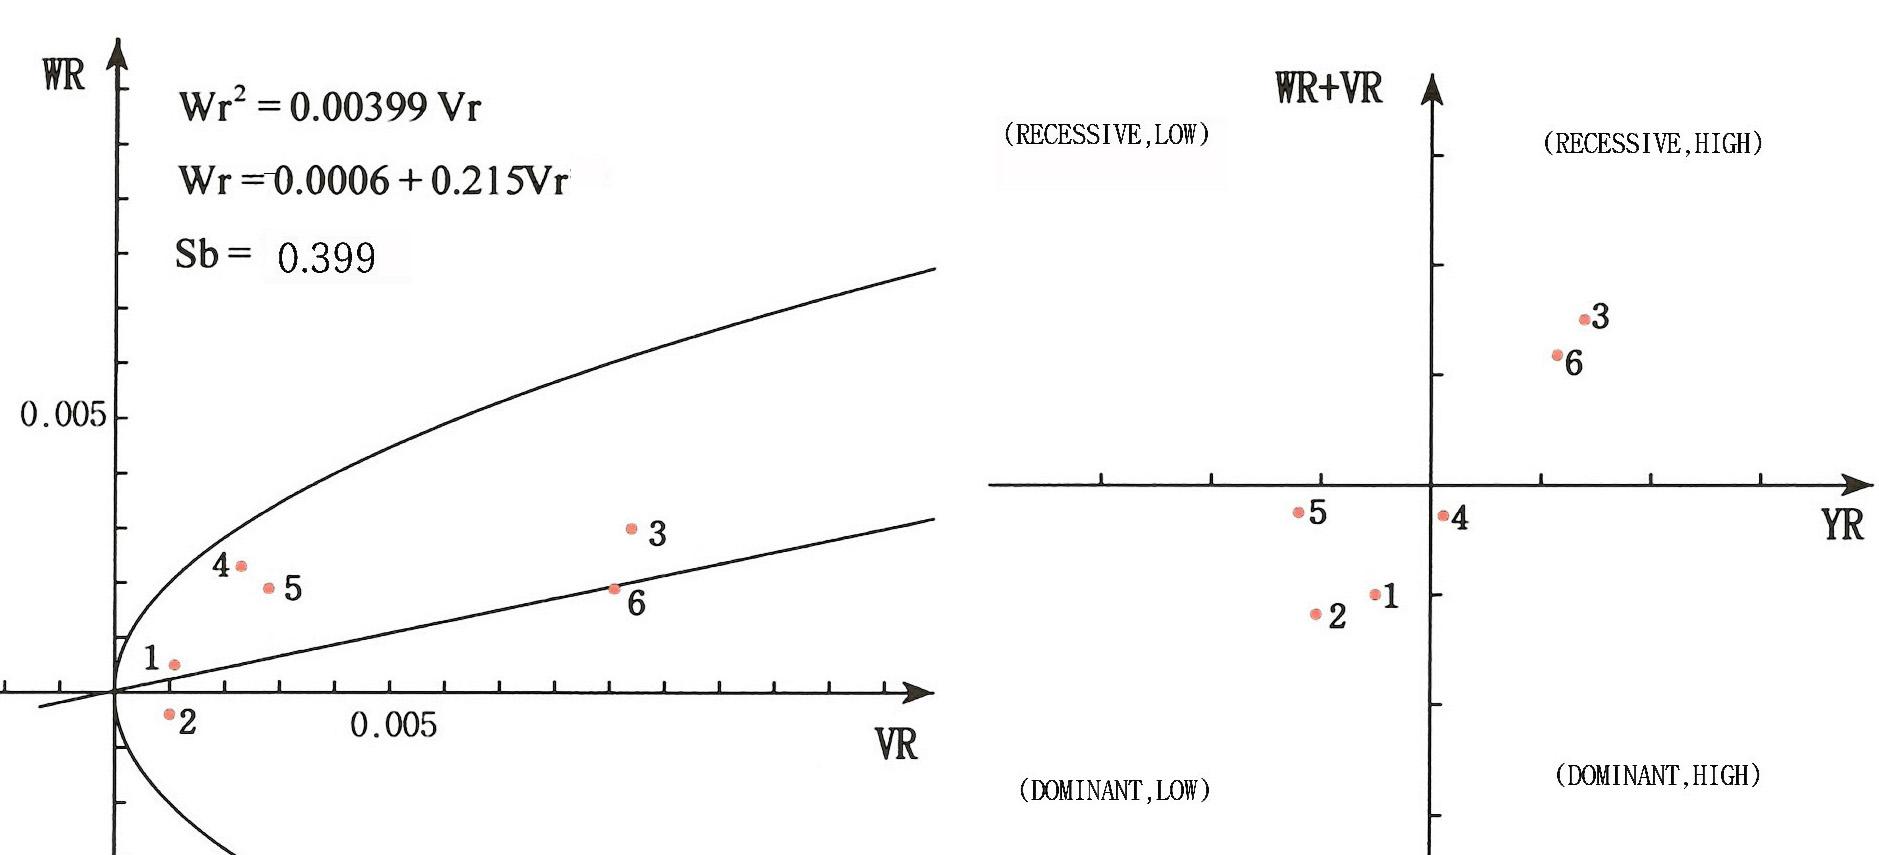 Variance(Vr), covariance(Wr) and standardized deviation graph for leaf dry weight (1: Cheongchima, 2: Nokchima, 3: Yulpung, 4: Jaba, 5: Kangpung, 6: Clarement).